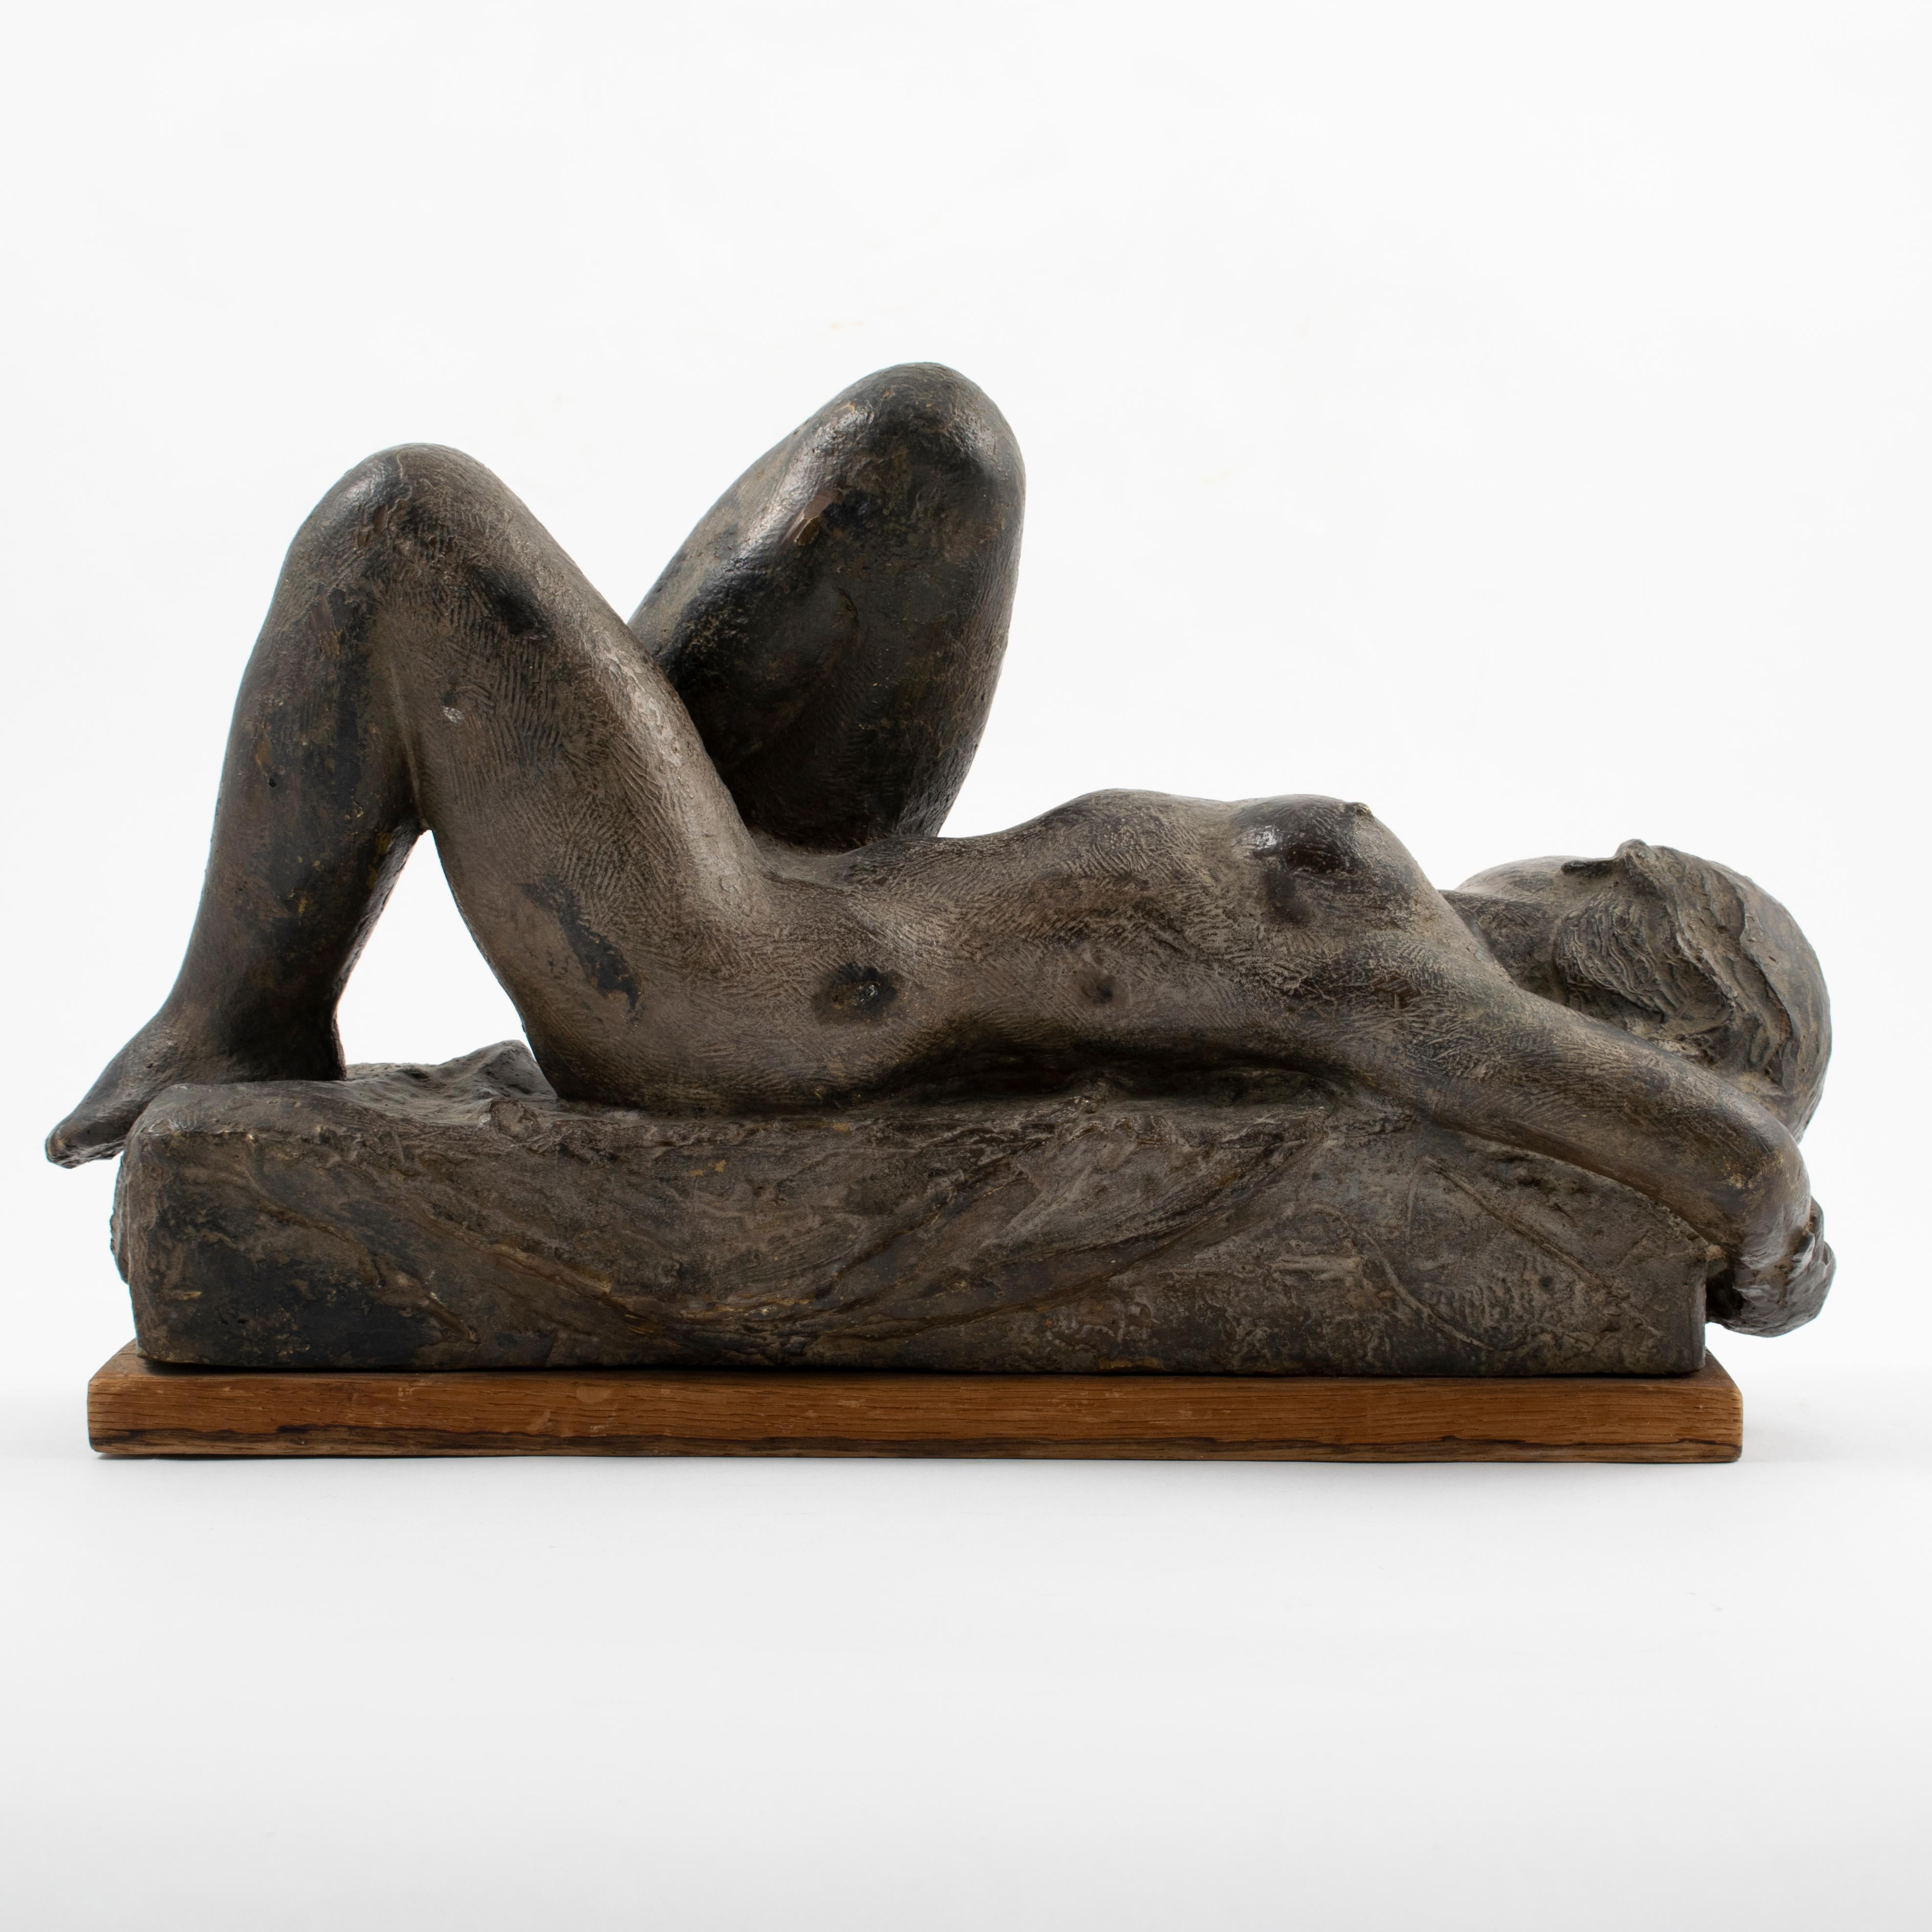 Bronze sculpture of a nude woman lying down. Beautiful dark patina.
Signed with monogram.
Denmark 1945.